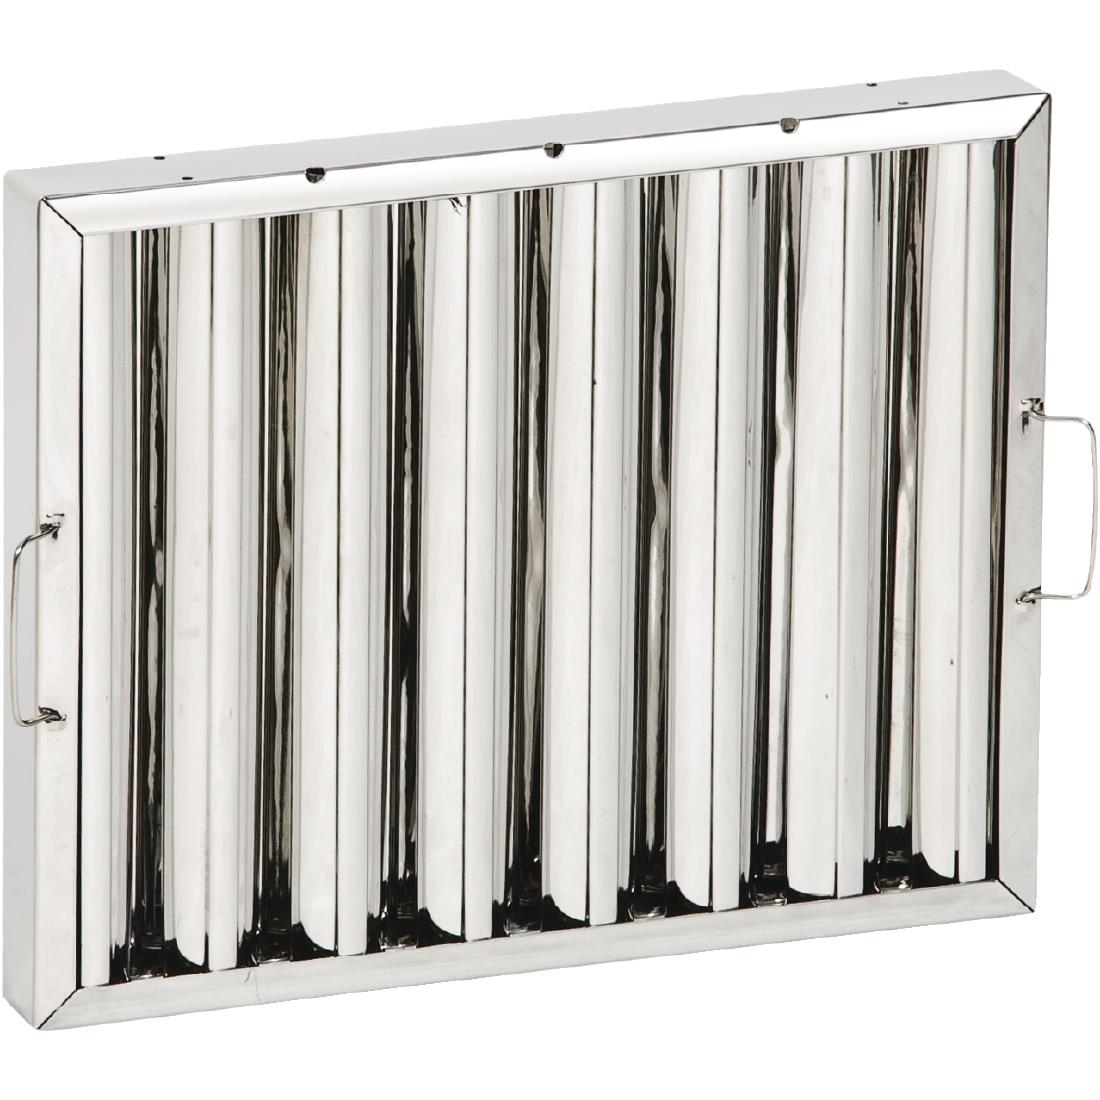 Kitchen Canopy Baffle Filter 495 x 495mm